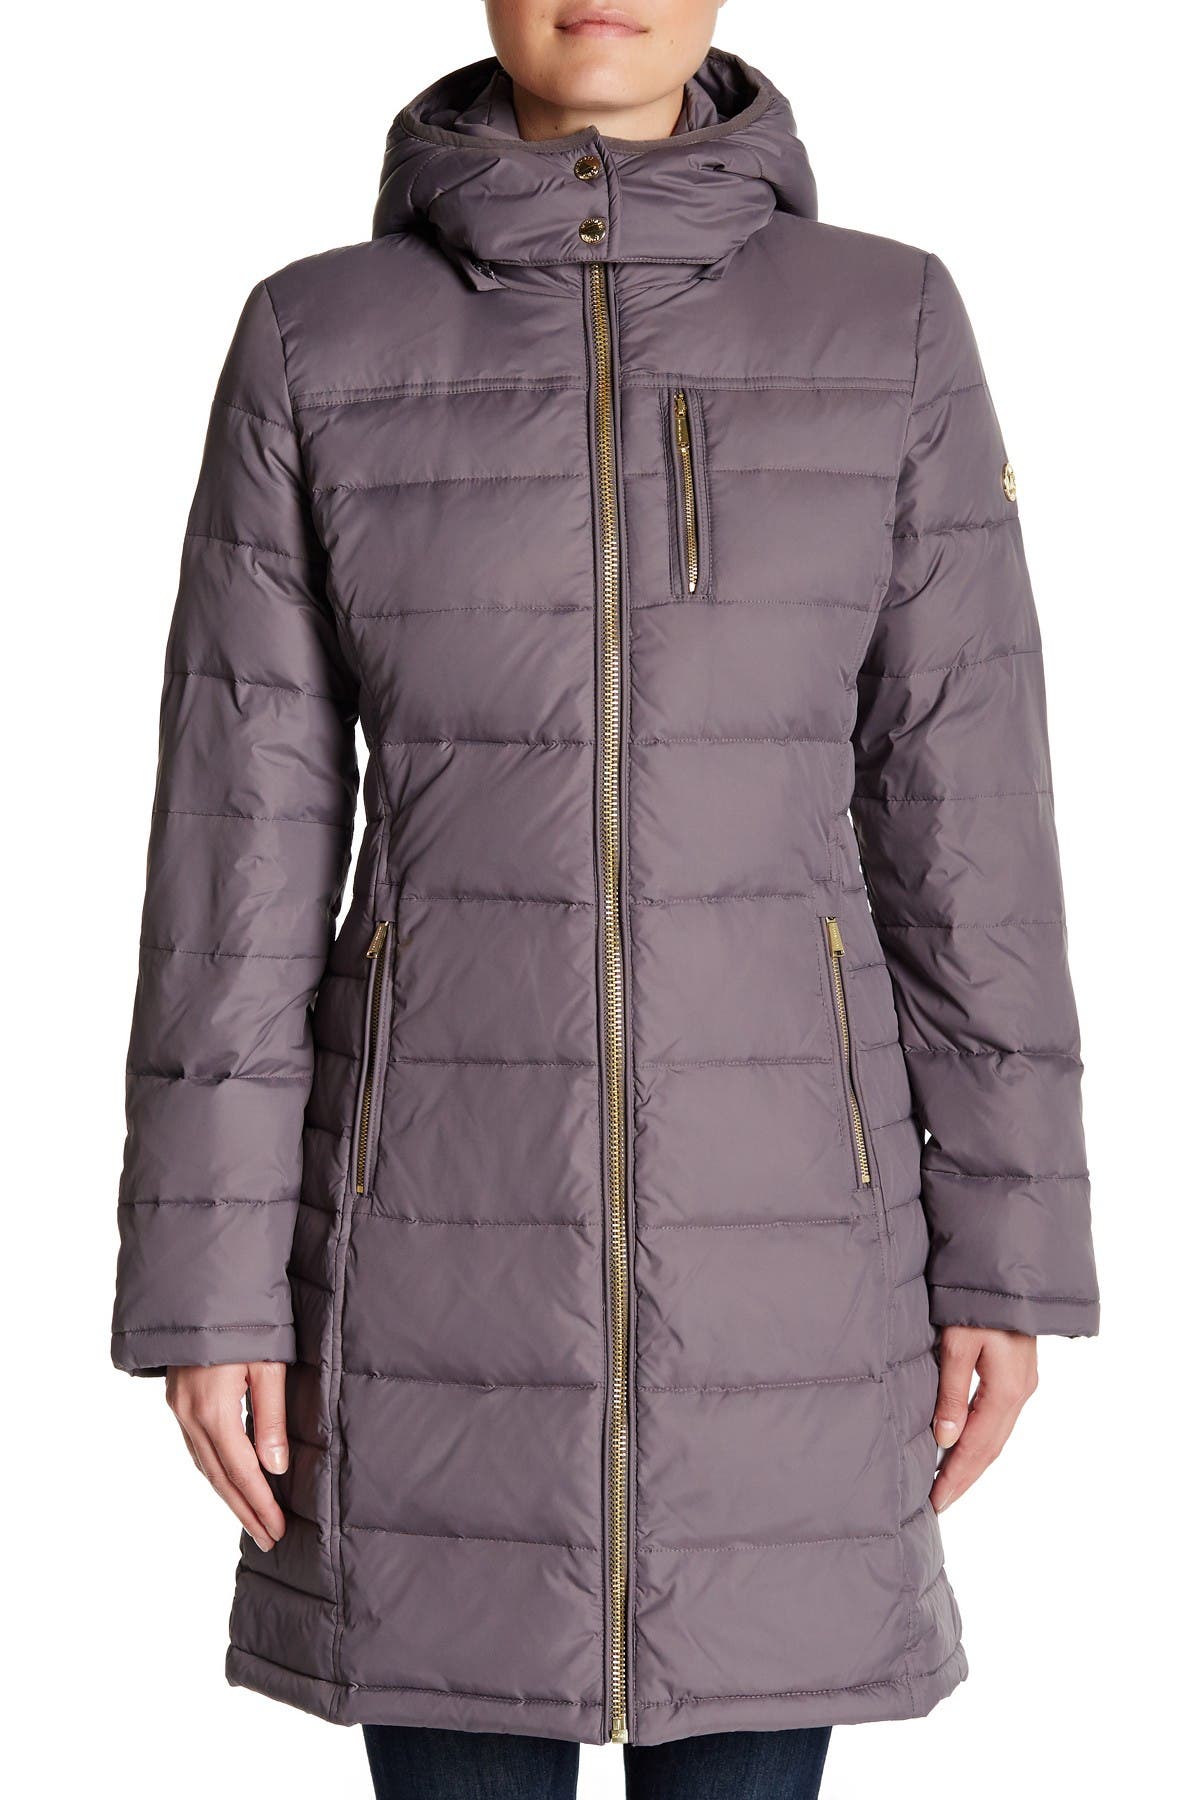 Kors Michael Kors | Hooded Down & Feather Quilted Coat | Nordstrom Rack